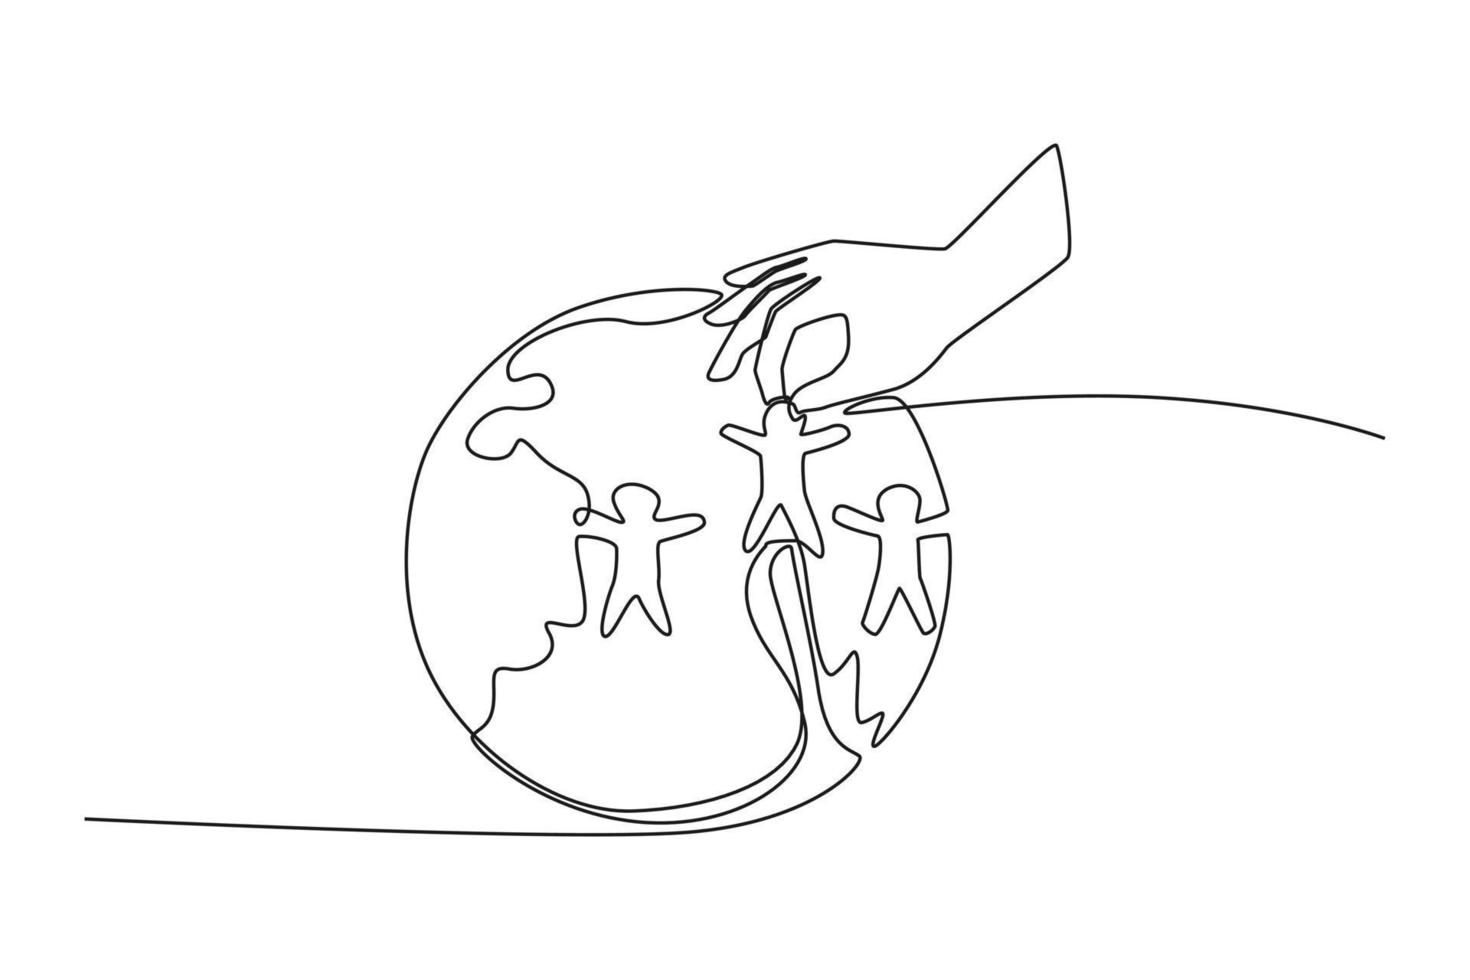 Single one line drawing hand putting people icon on globe. World population day. Continuous line draw design graphic vector illustration.